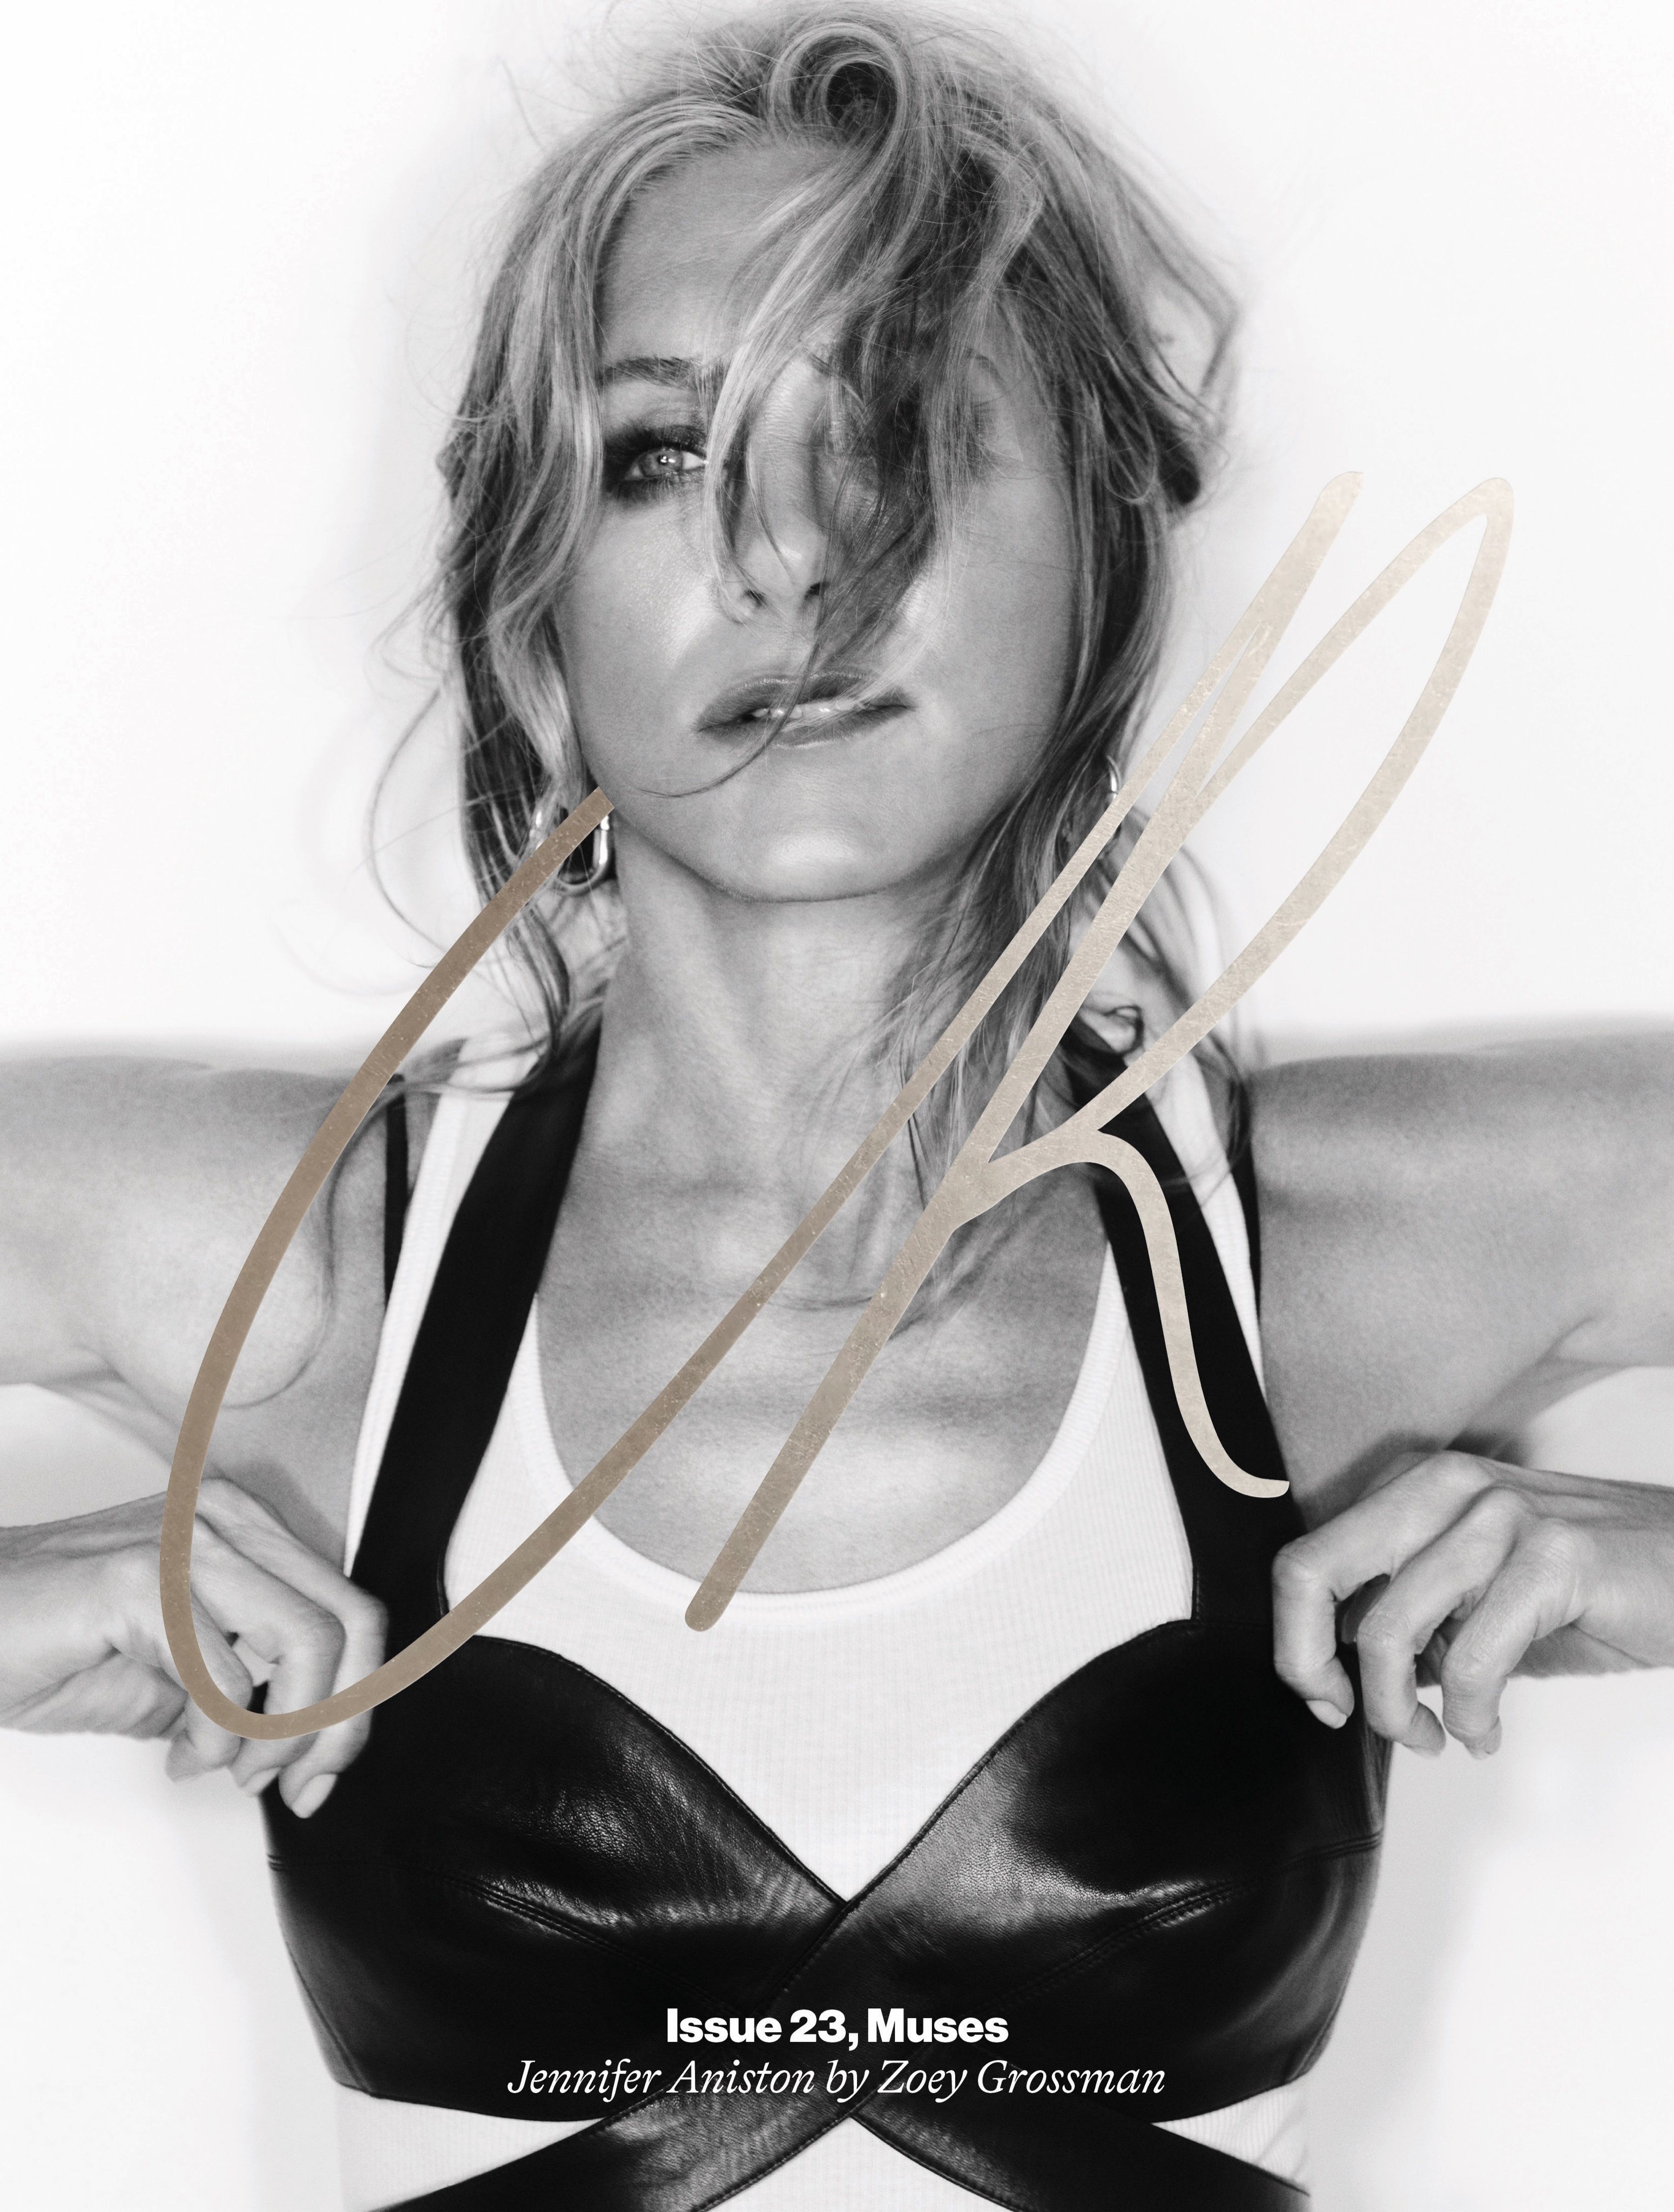 Jennifer Aniston wears a leather bra on CR Fashion book cover